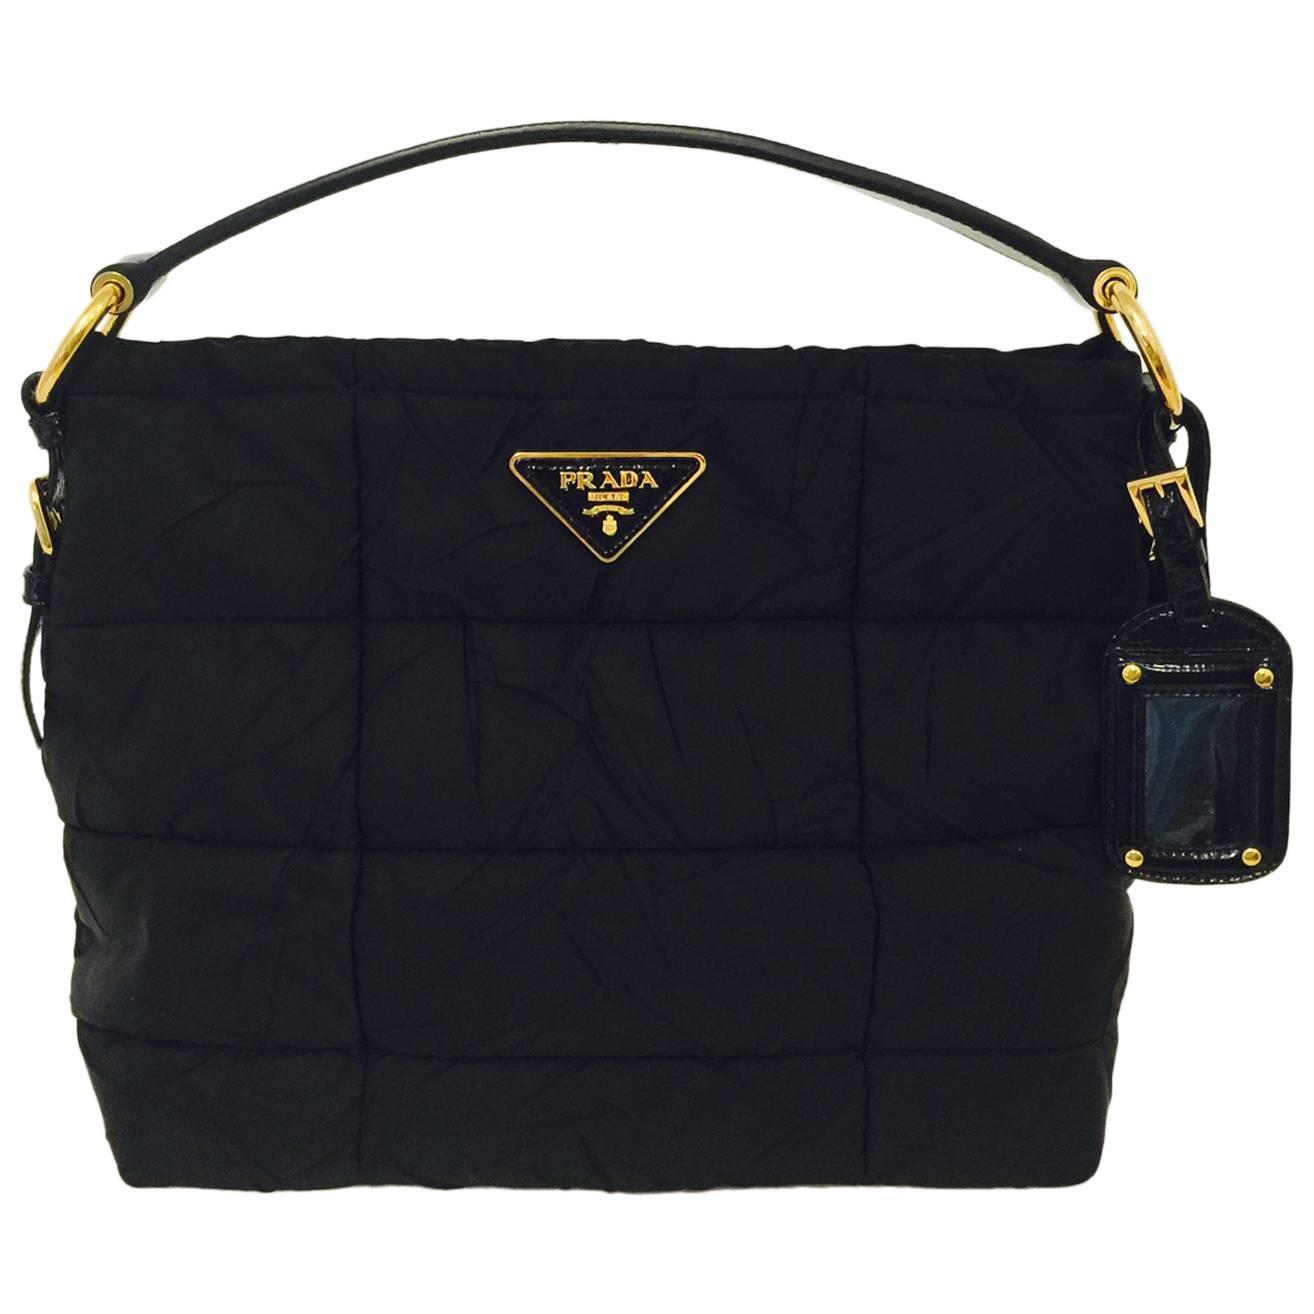 Prada Black Quilted Nylon Handbag With Patent Leather Handle and Brass Hardware For Sale at 1stdibs